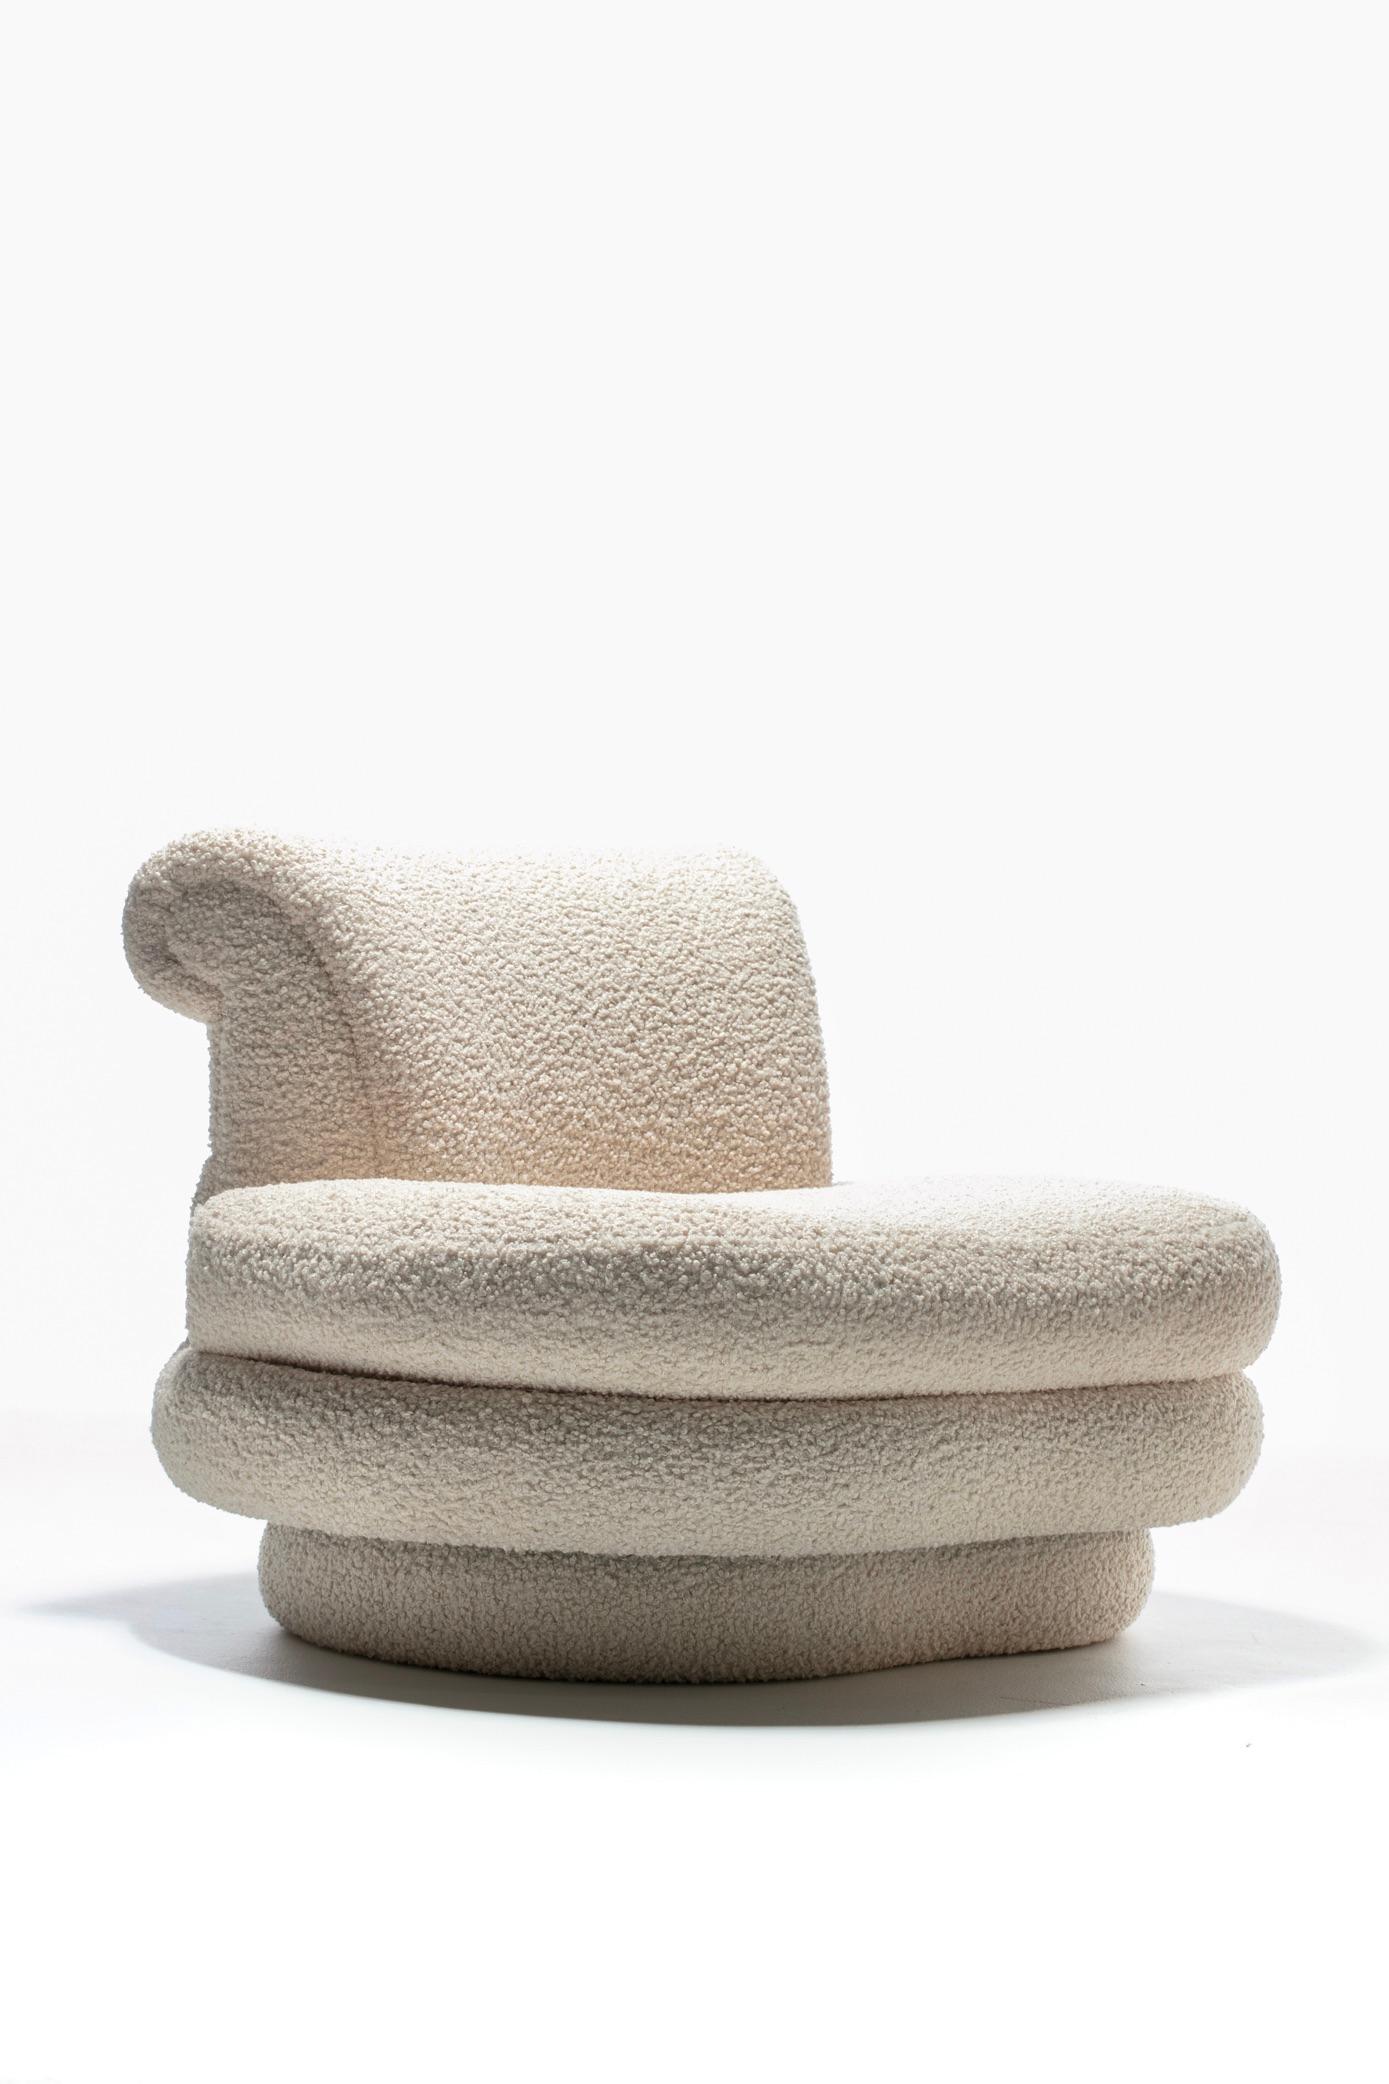 American Adrian Pearsall Channeled Post Modern Slipper Chair in Ivory White Bouclé For Sale